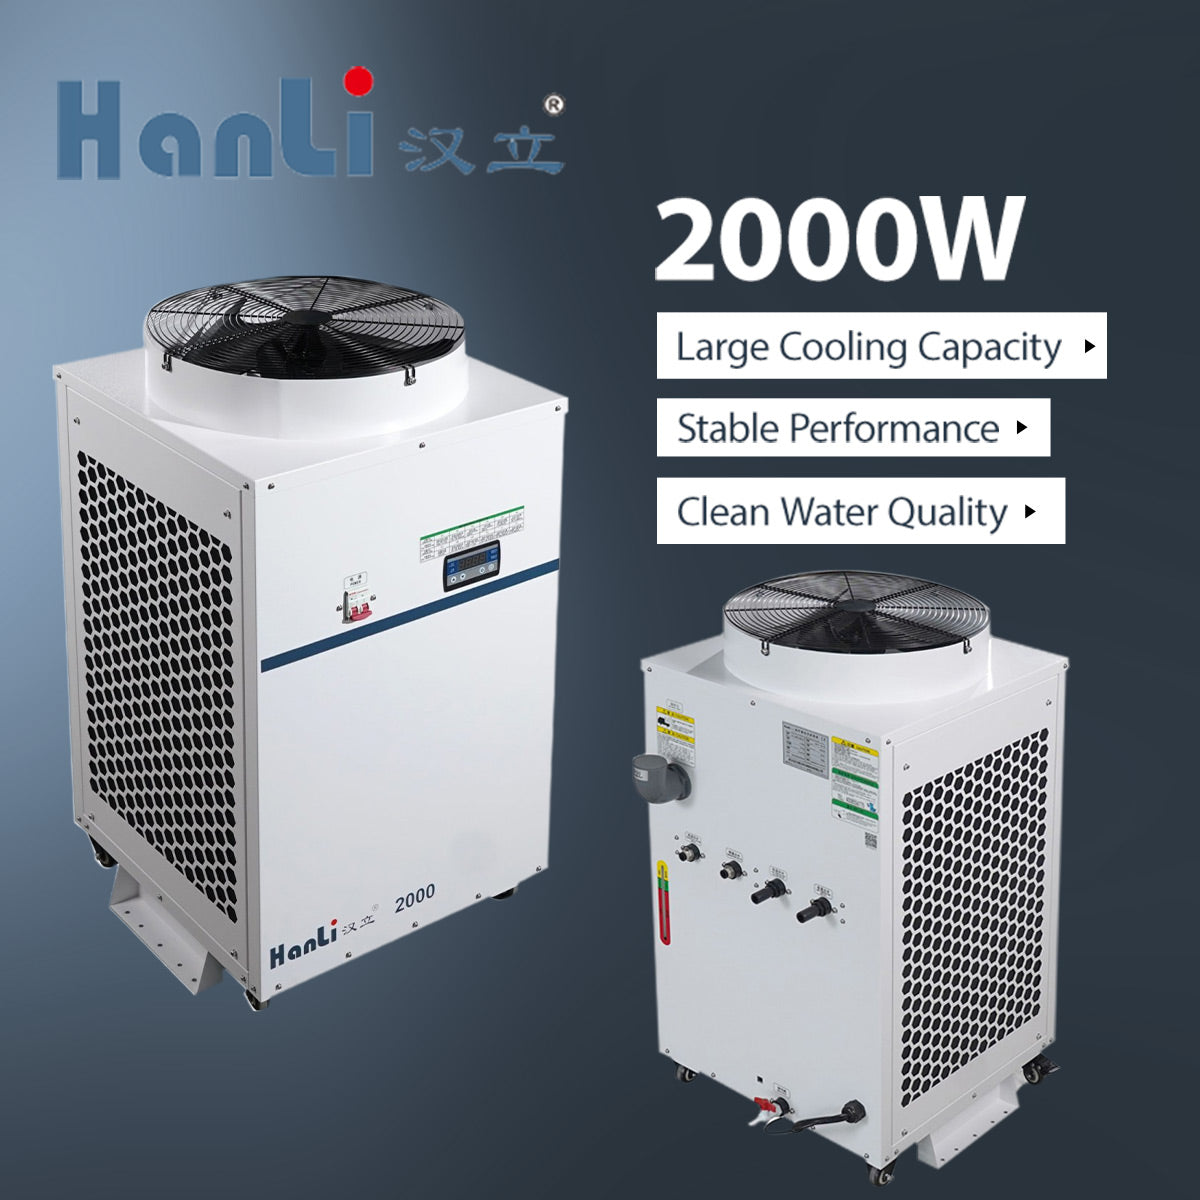 Startnow 2000W Industrial Laser System Cooled Water Chiller With Dual Temperature Control Circuit